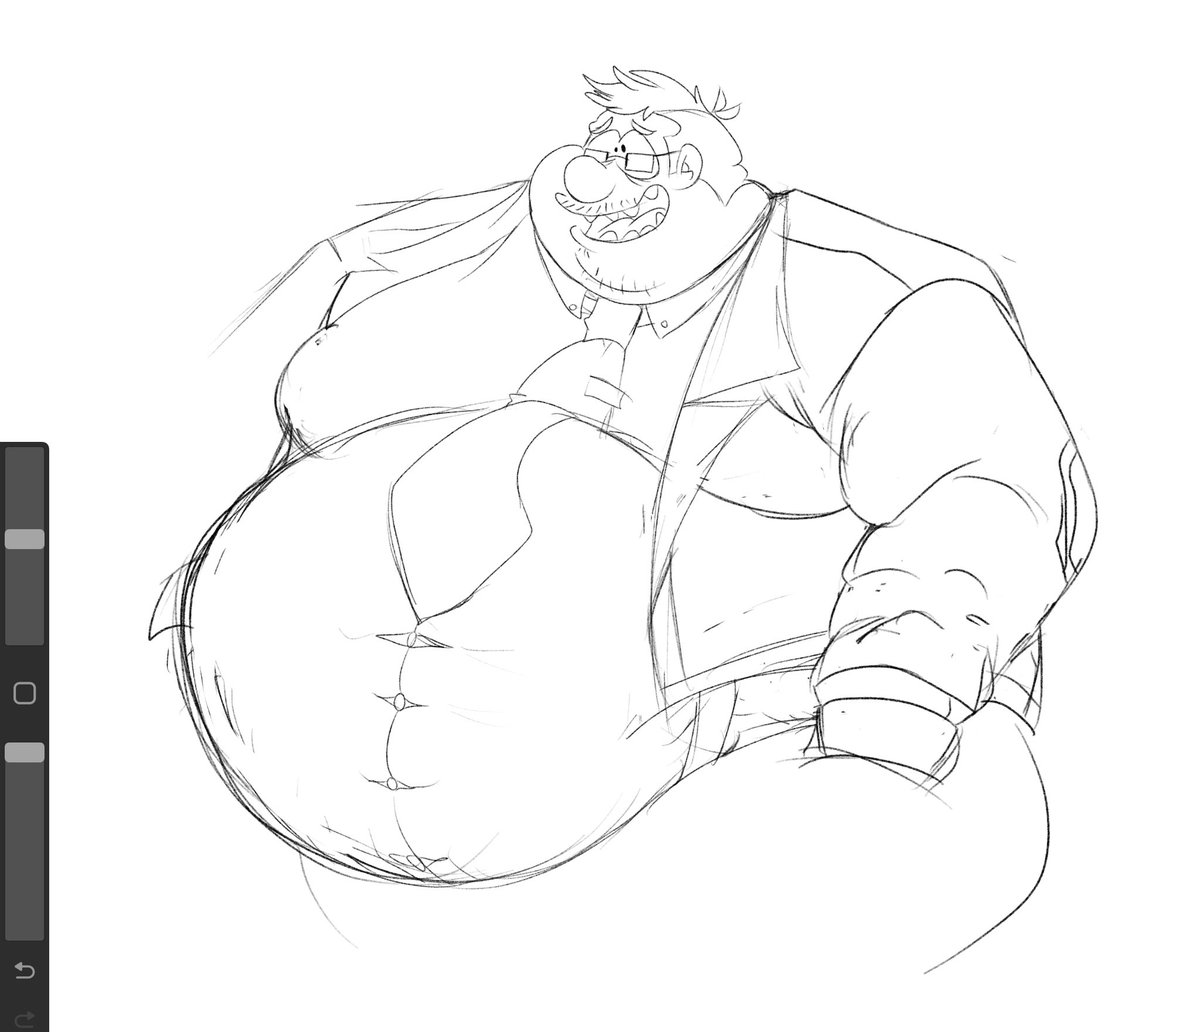 “remember to take your mandatory snack break” says the boss (wip?)